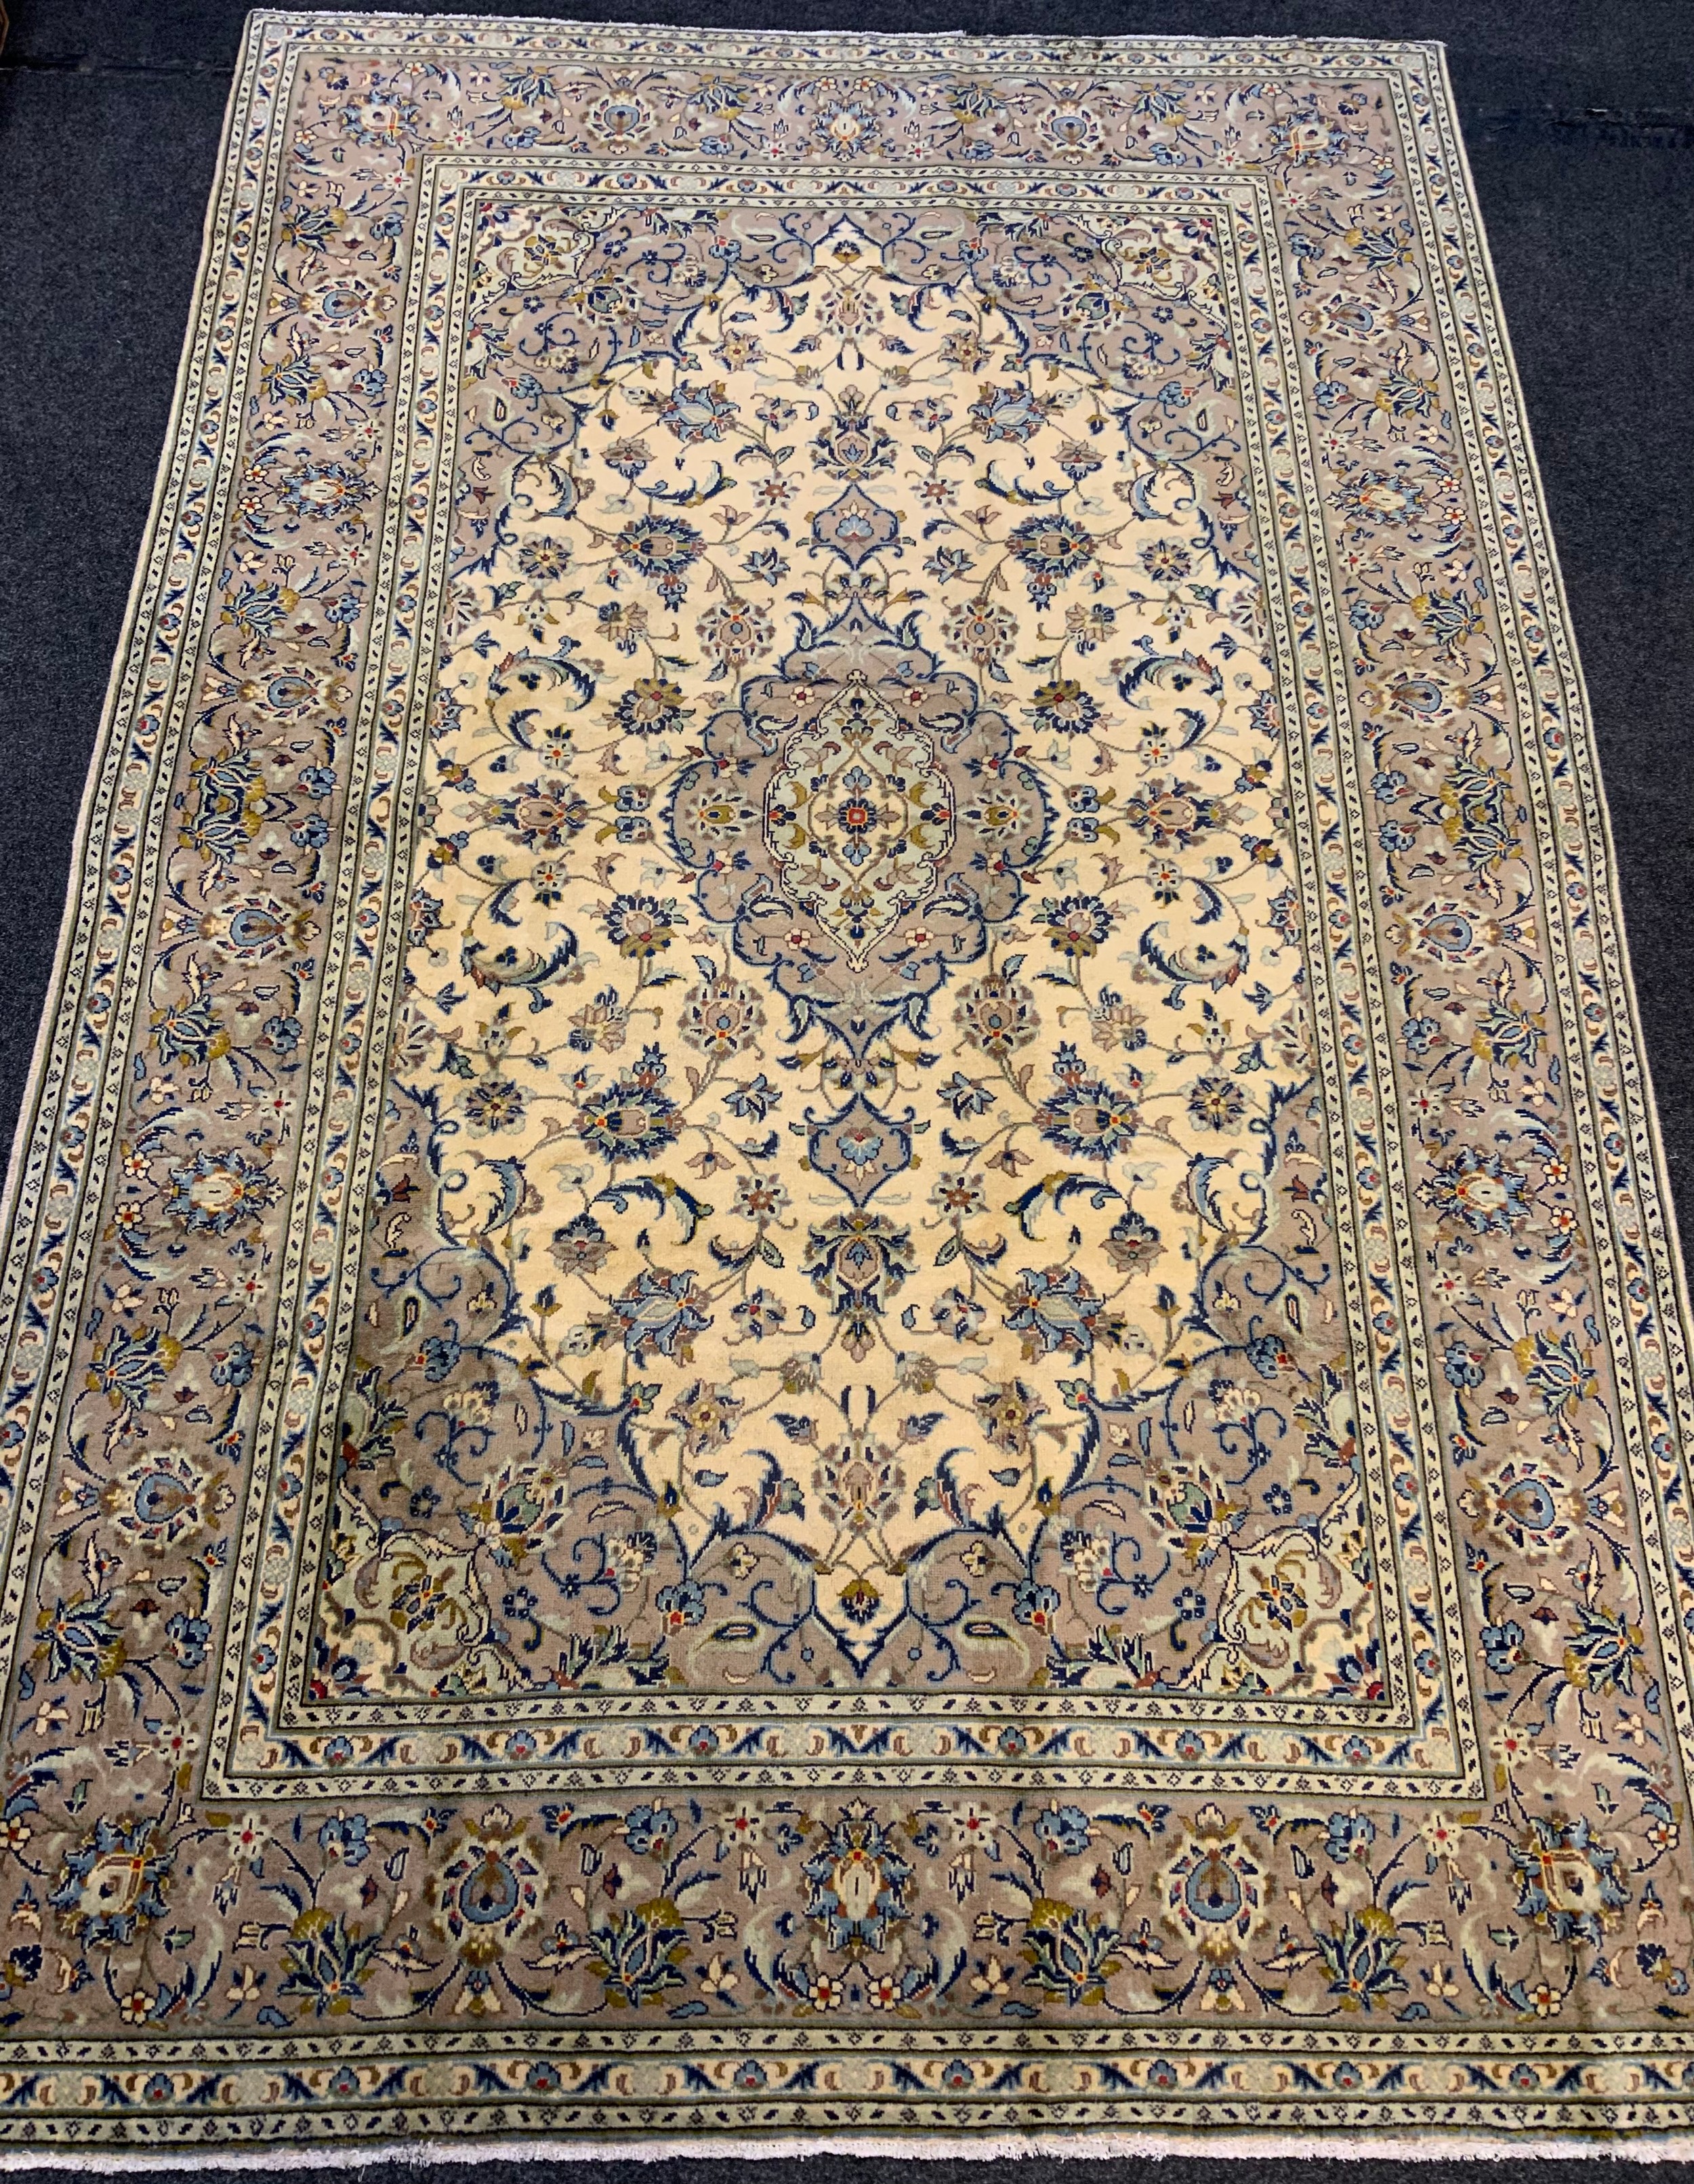 A fine Kashan rug / carpet, woven in muted tones of grey, blue, and cream, 310cm x 205cm.